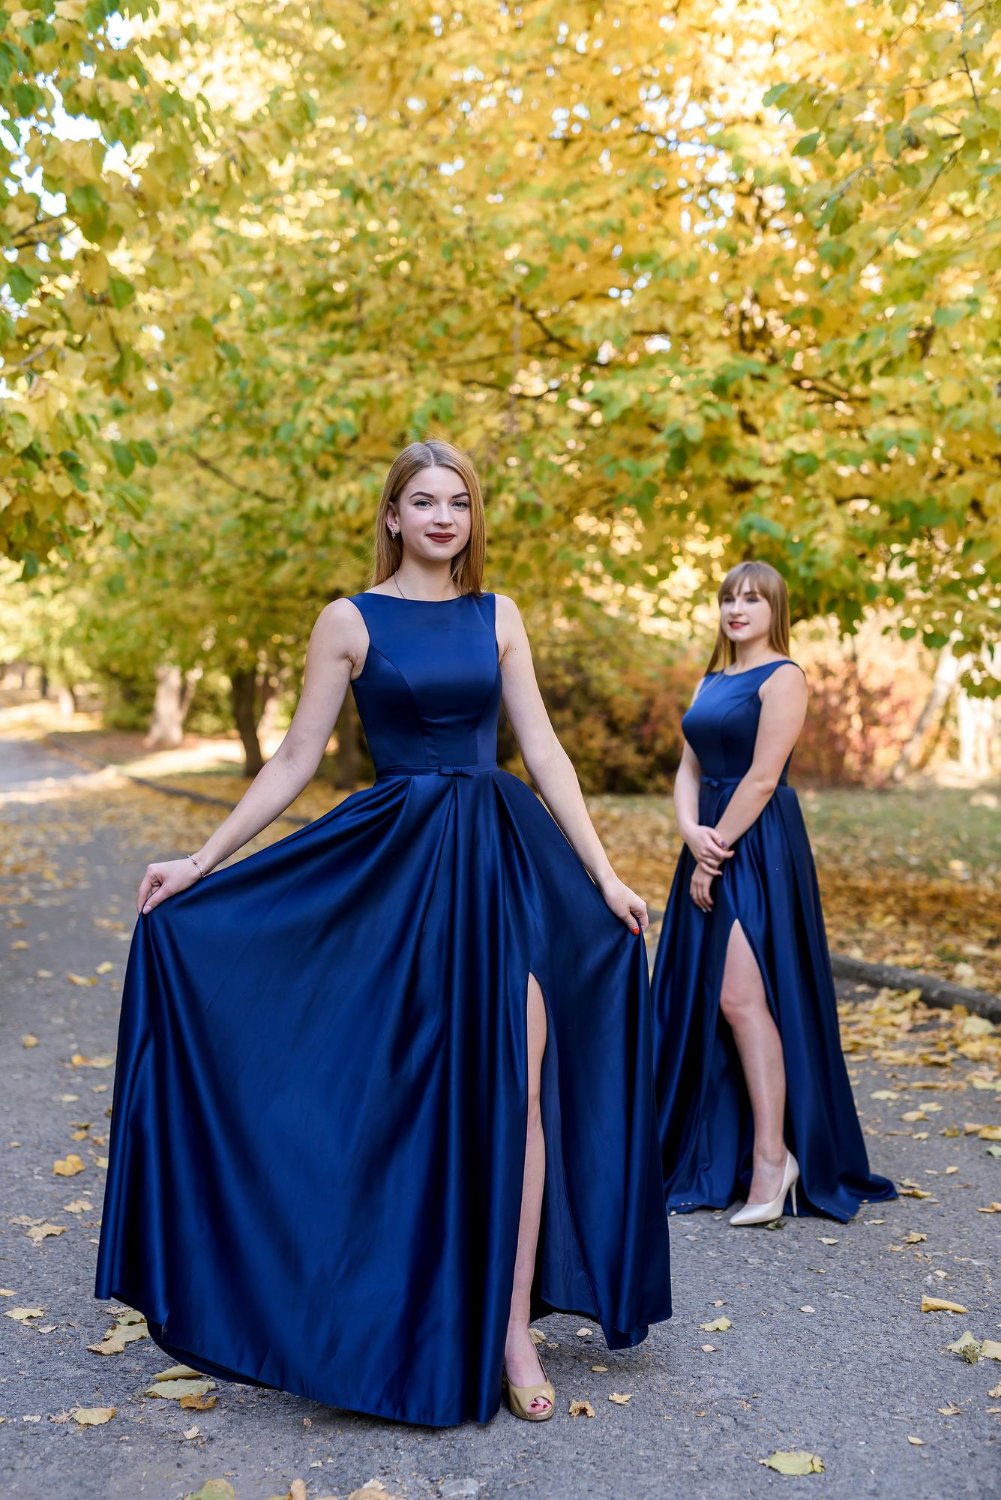 young ladies in fashionable blue dresses